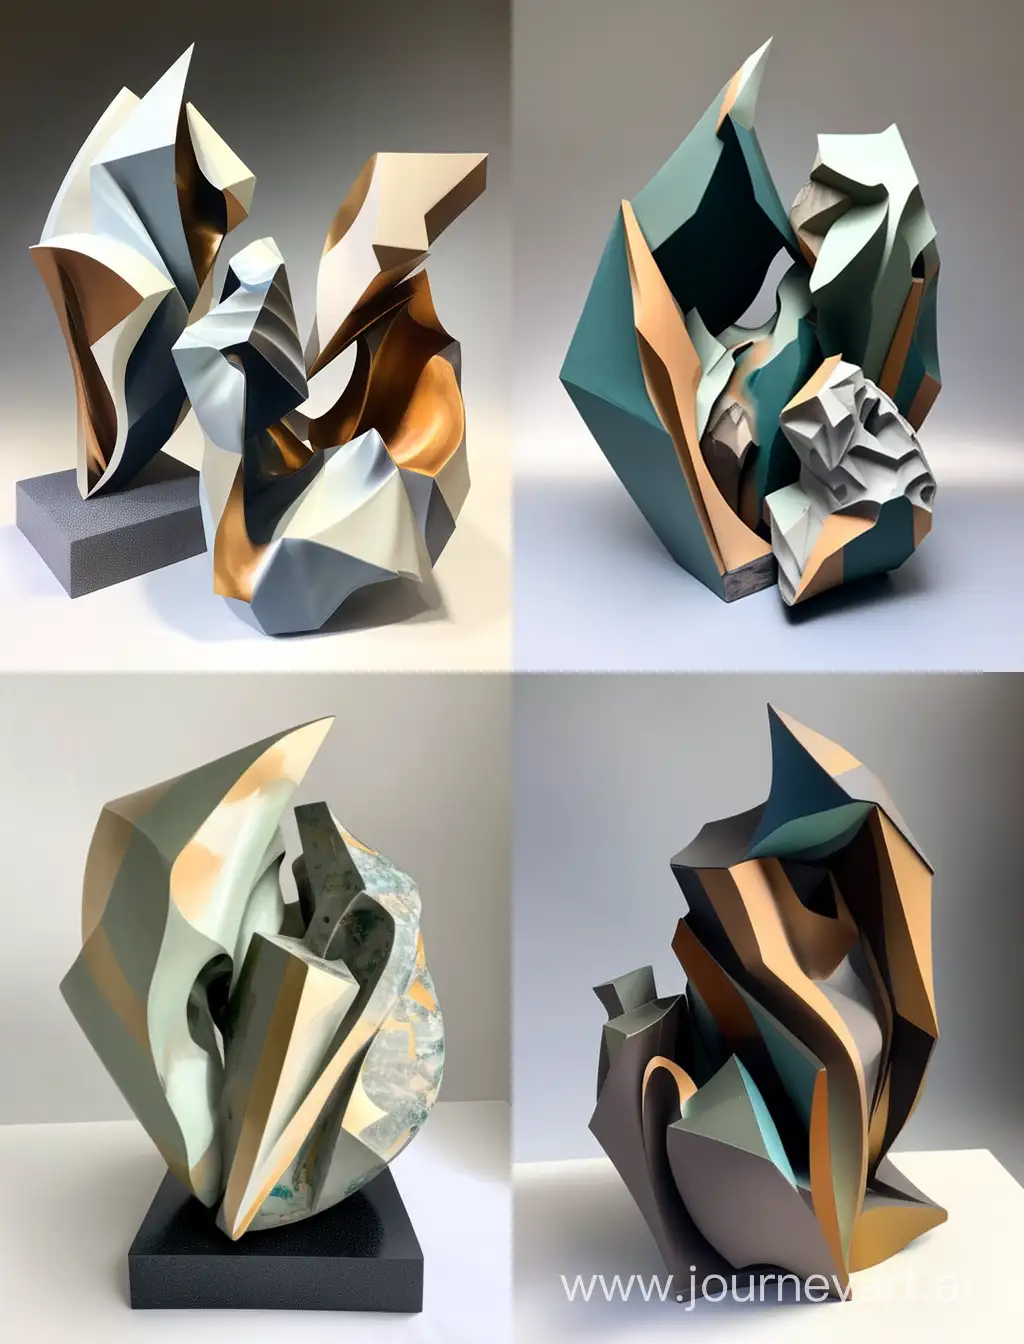 Abstract-Geometric-Sculpture-Ceramics-60s-Style-with-Voluminous-Details-and-Muted-Shades